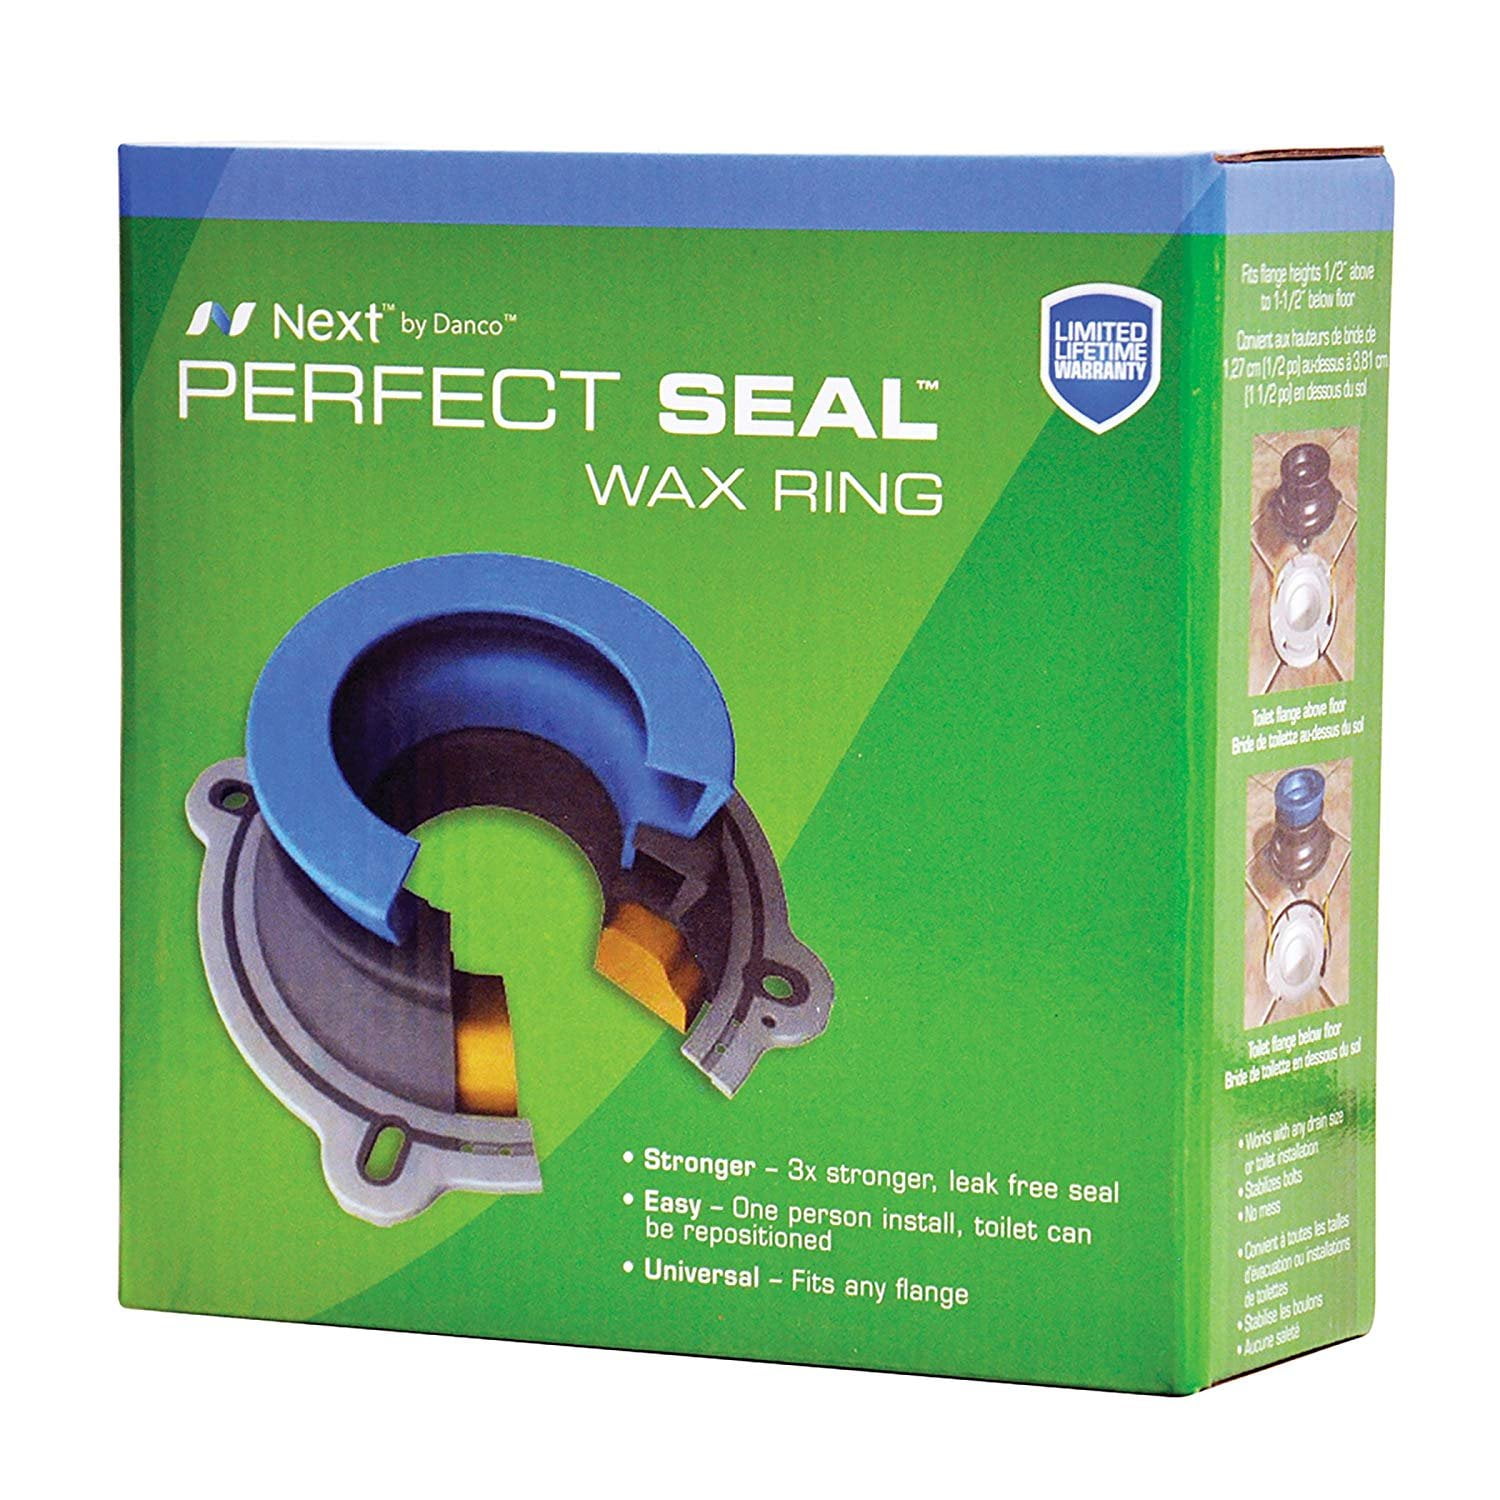 Toilet Wax Ring or Perfect Seal? - Danco